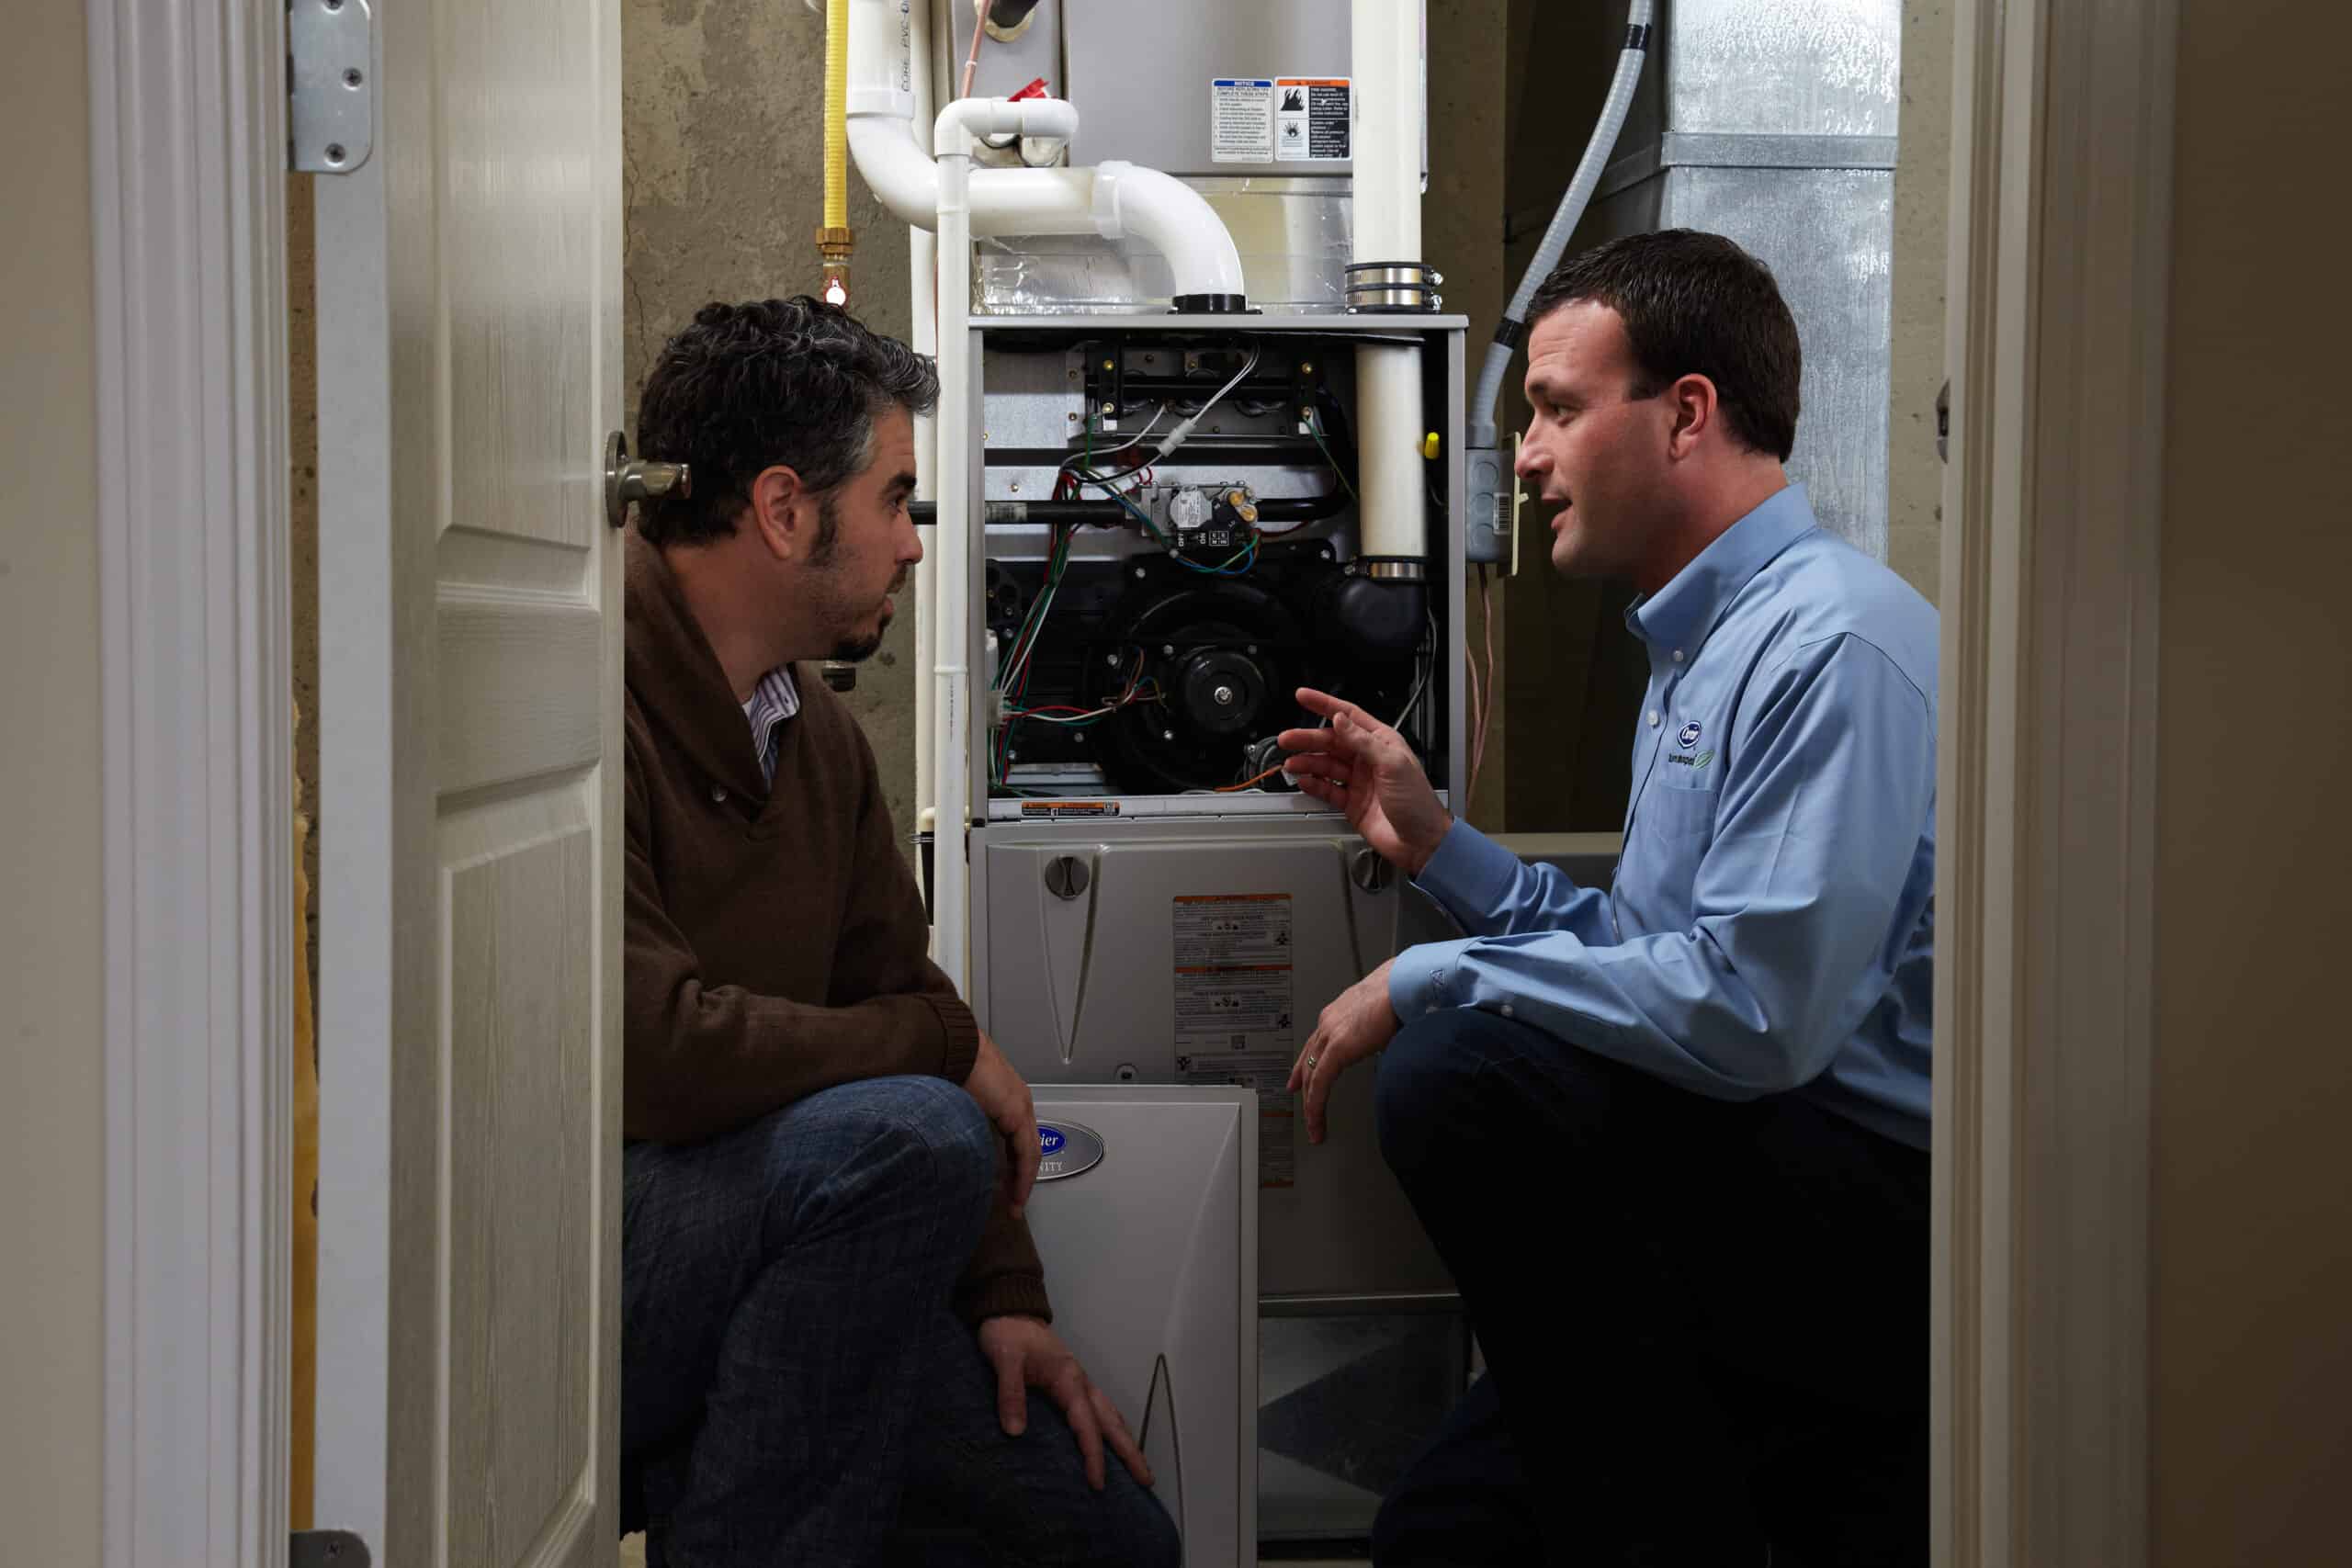 furnace sales and service